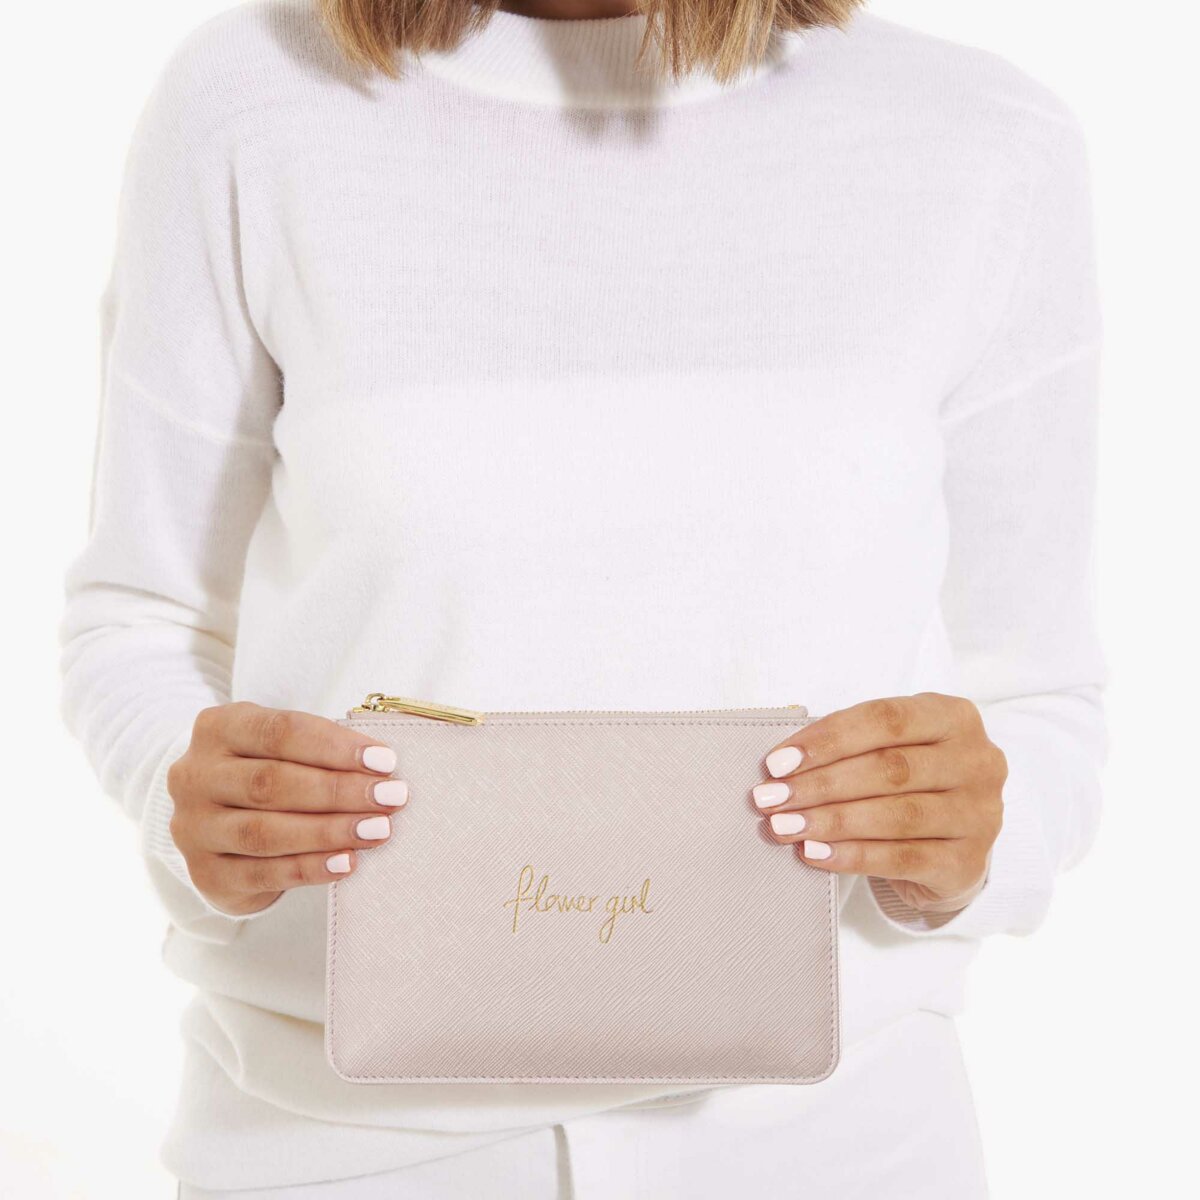 Katie Loxton Perfect Pouch - Flower Girl